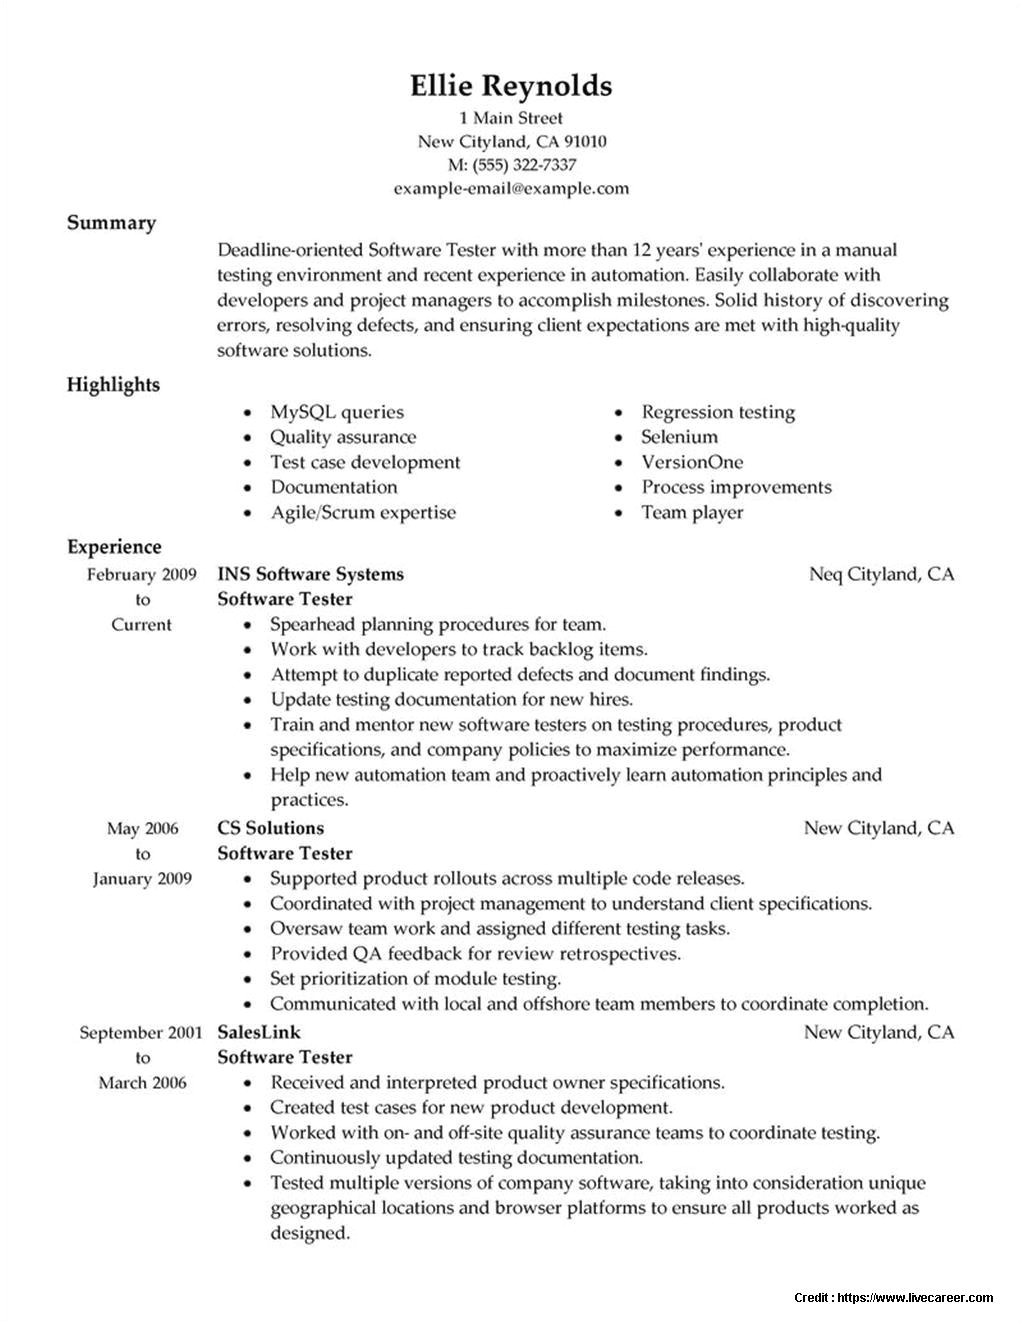 resume templates for experienced software testing professionals